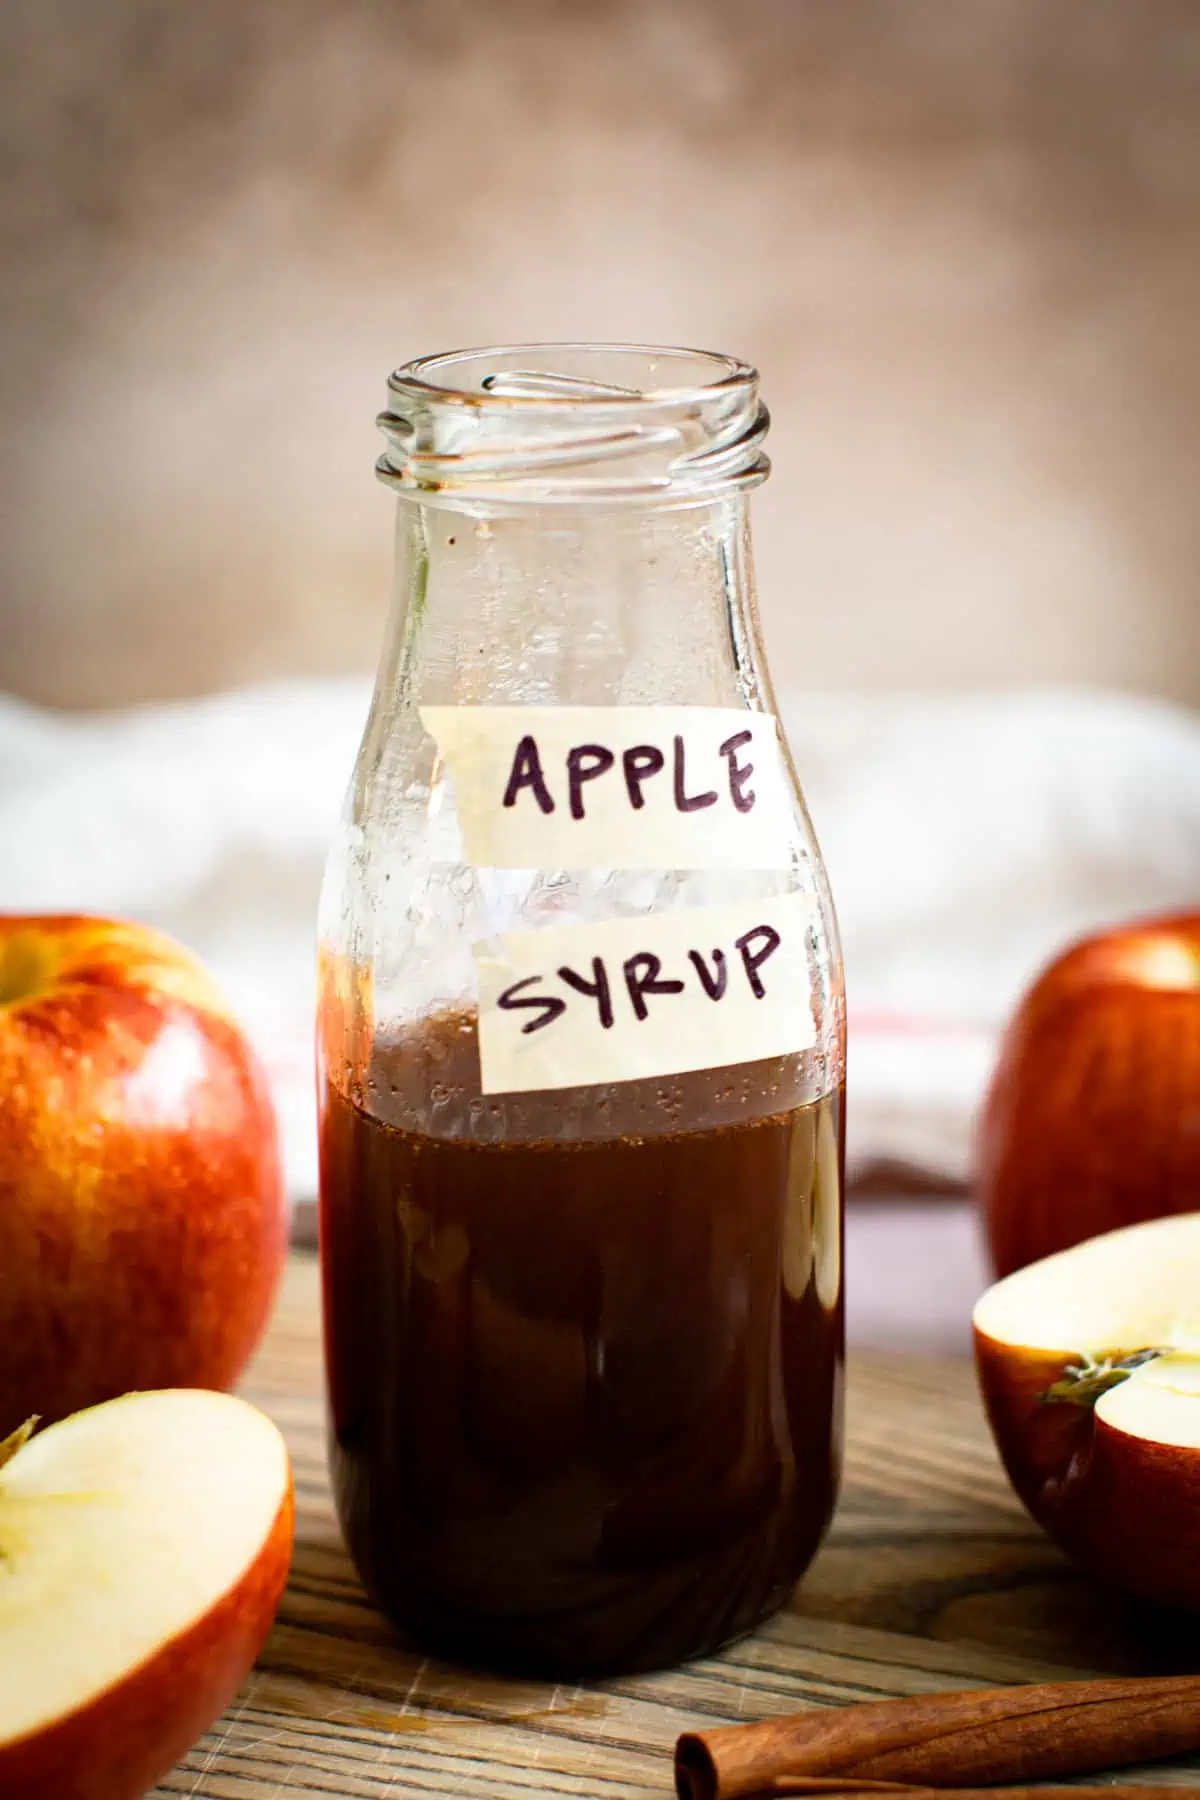 Apple brown sugar syrup in a bottle.